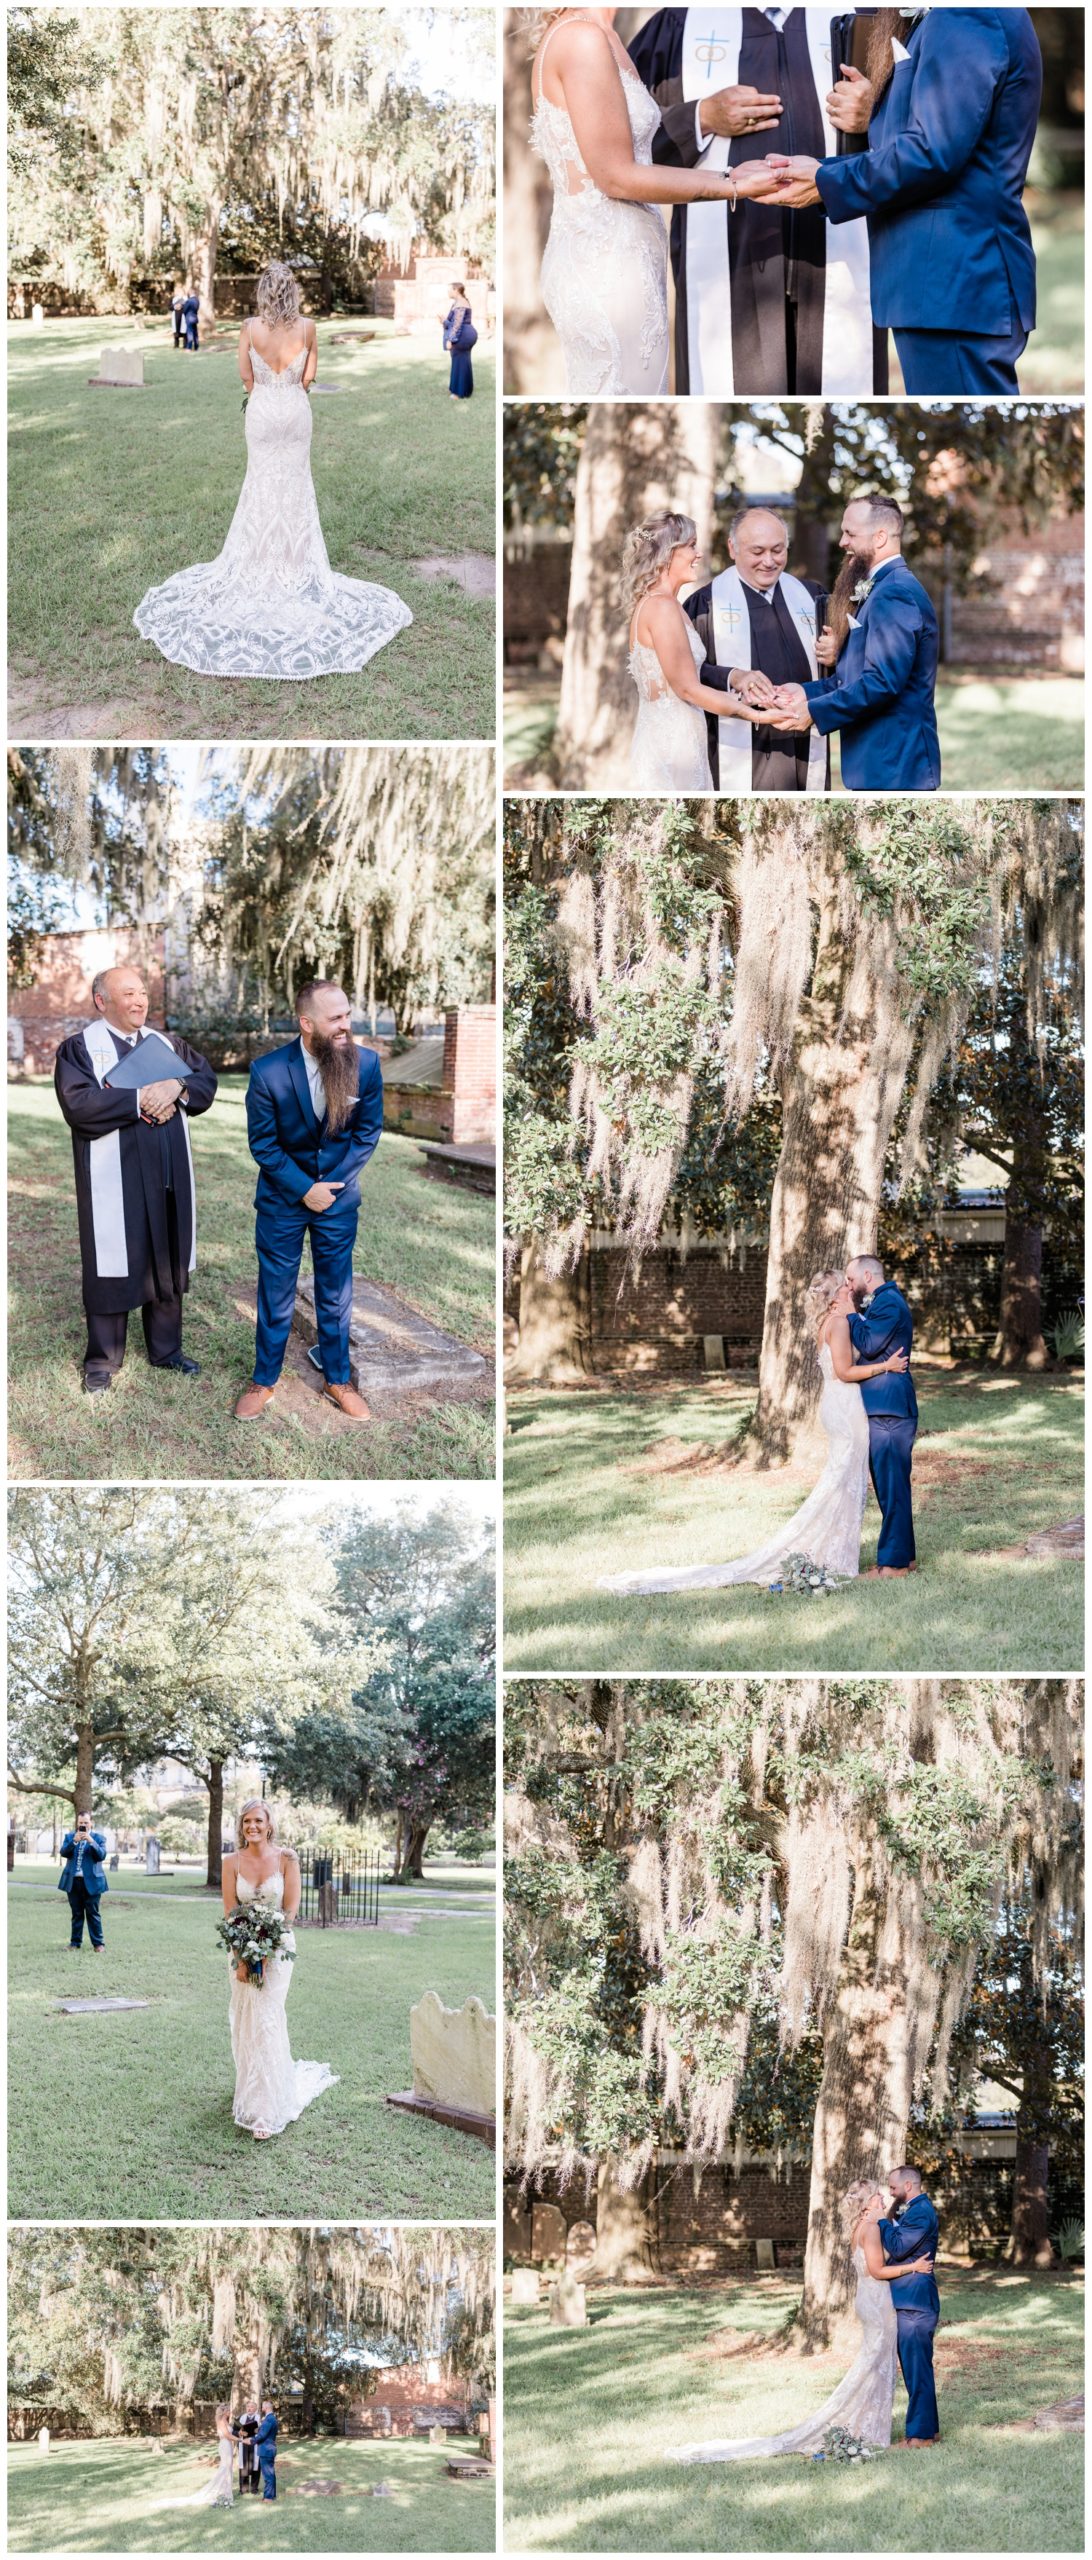 Elopement at Colonial Park Cemetery - the savannah elopement package - taylor brown photography